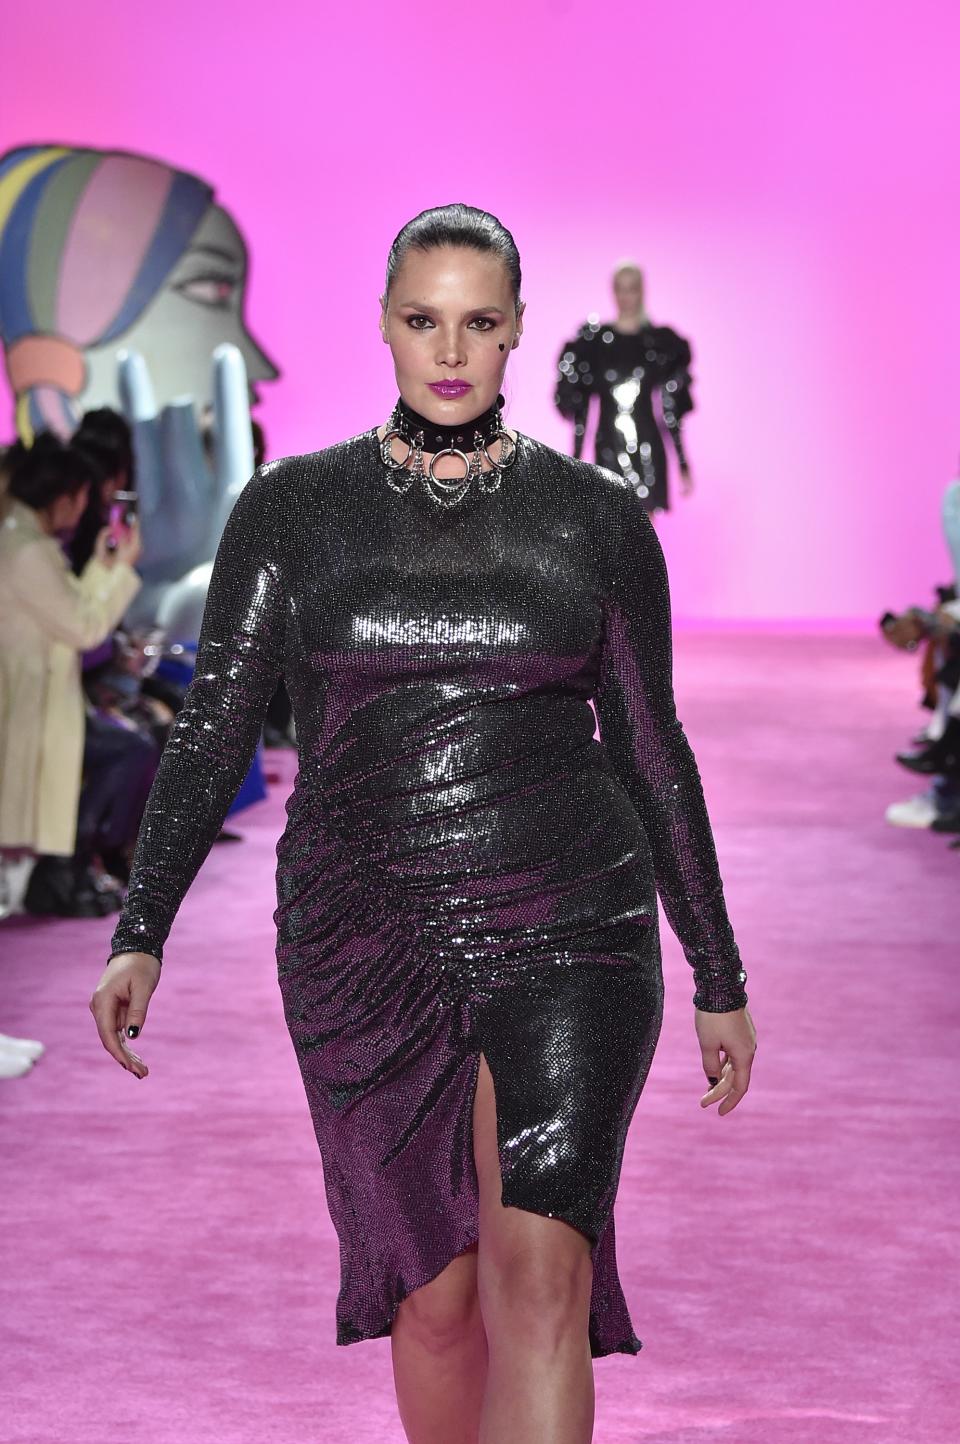 <h1 class="title">Christian Siriano - February 2020 - New York Fashion Week</h1><cite class="credit">Peter White</cite>